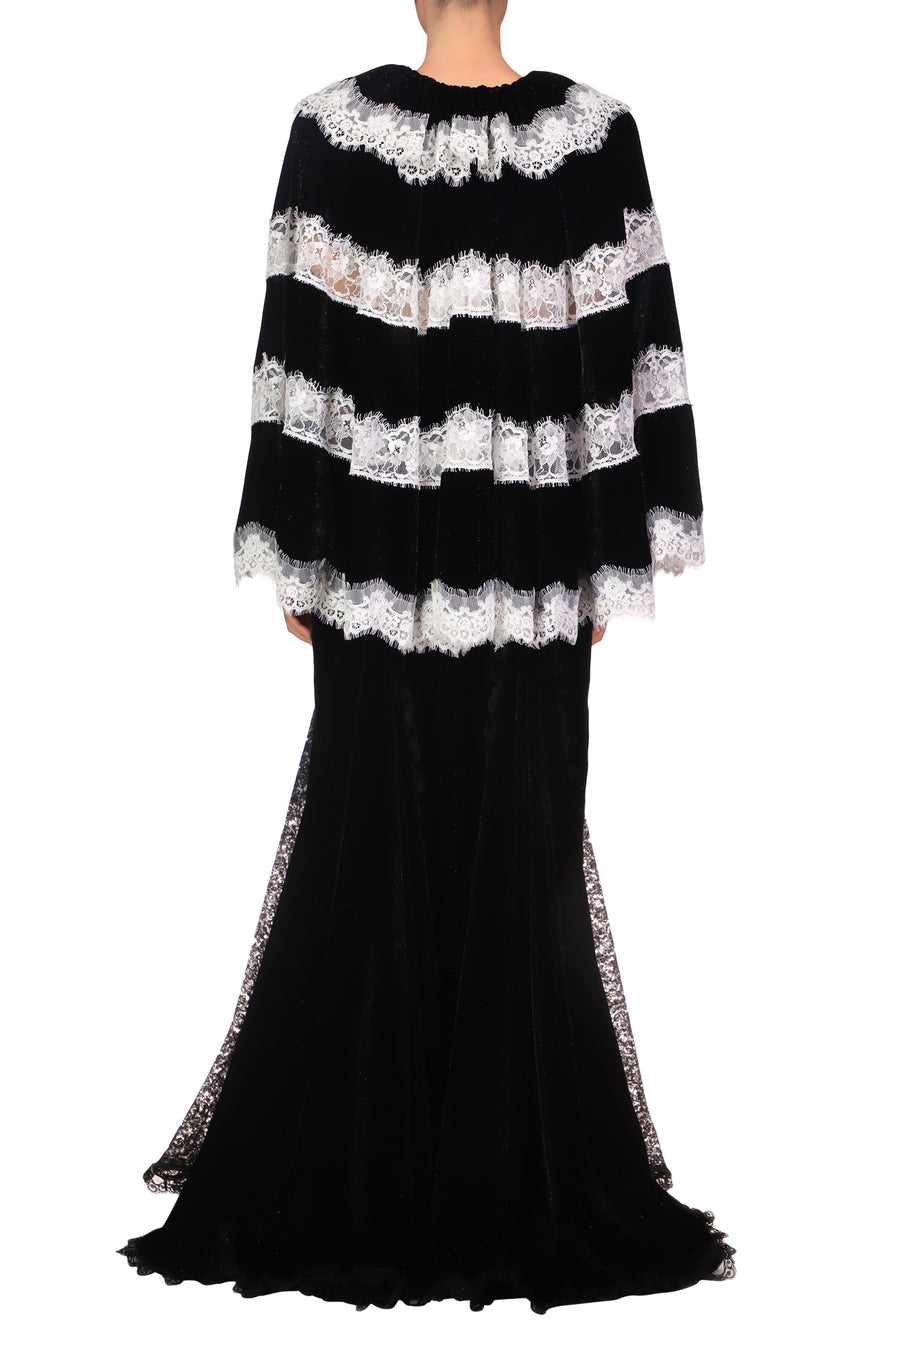 Metallic Black And White Lace Capelet